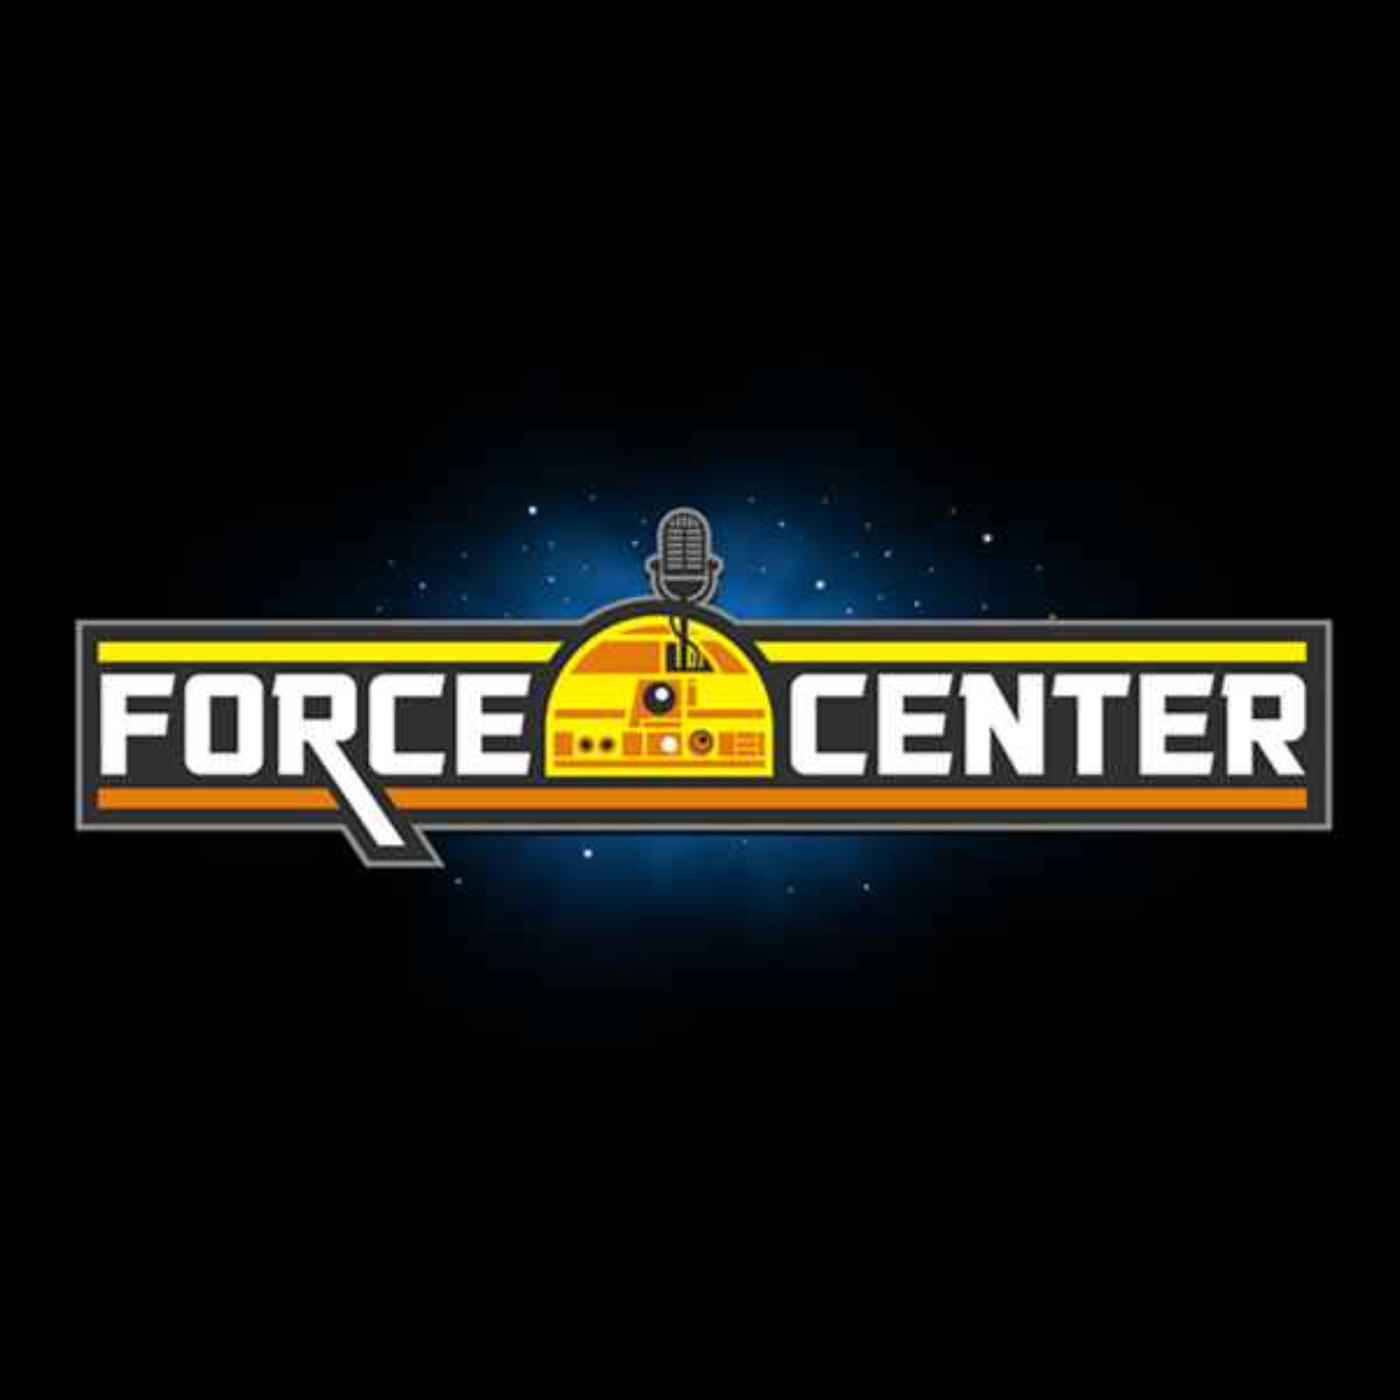 The Crawls of The Original Trilogy - ForceCenter - EP 389